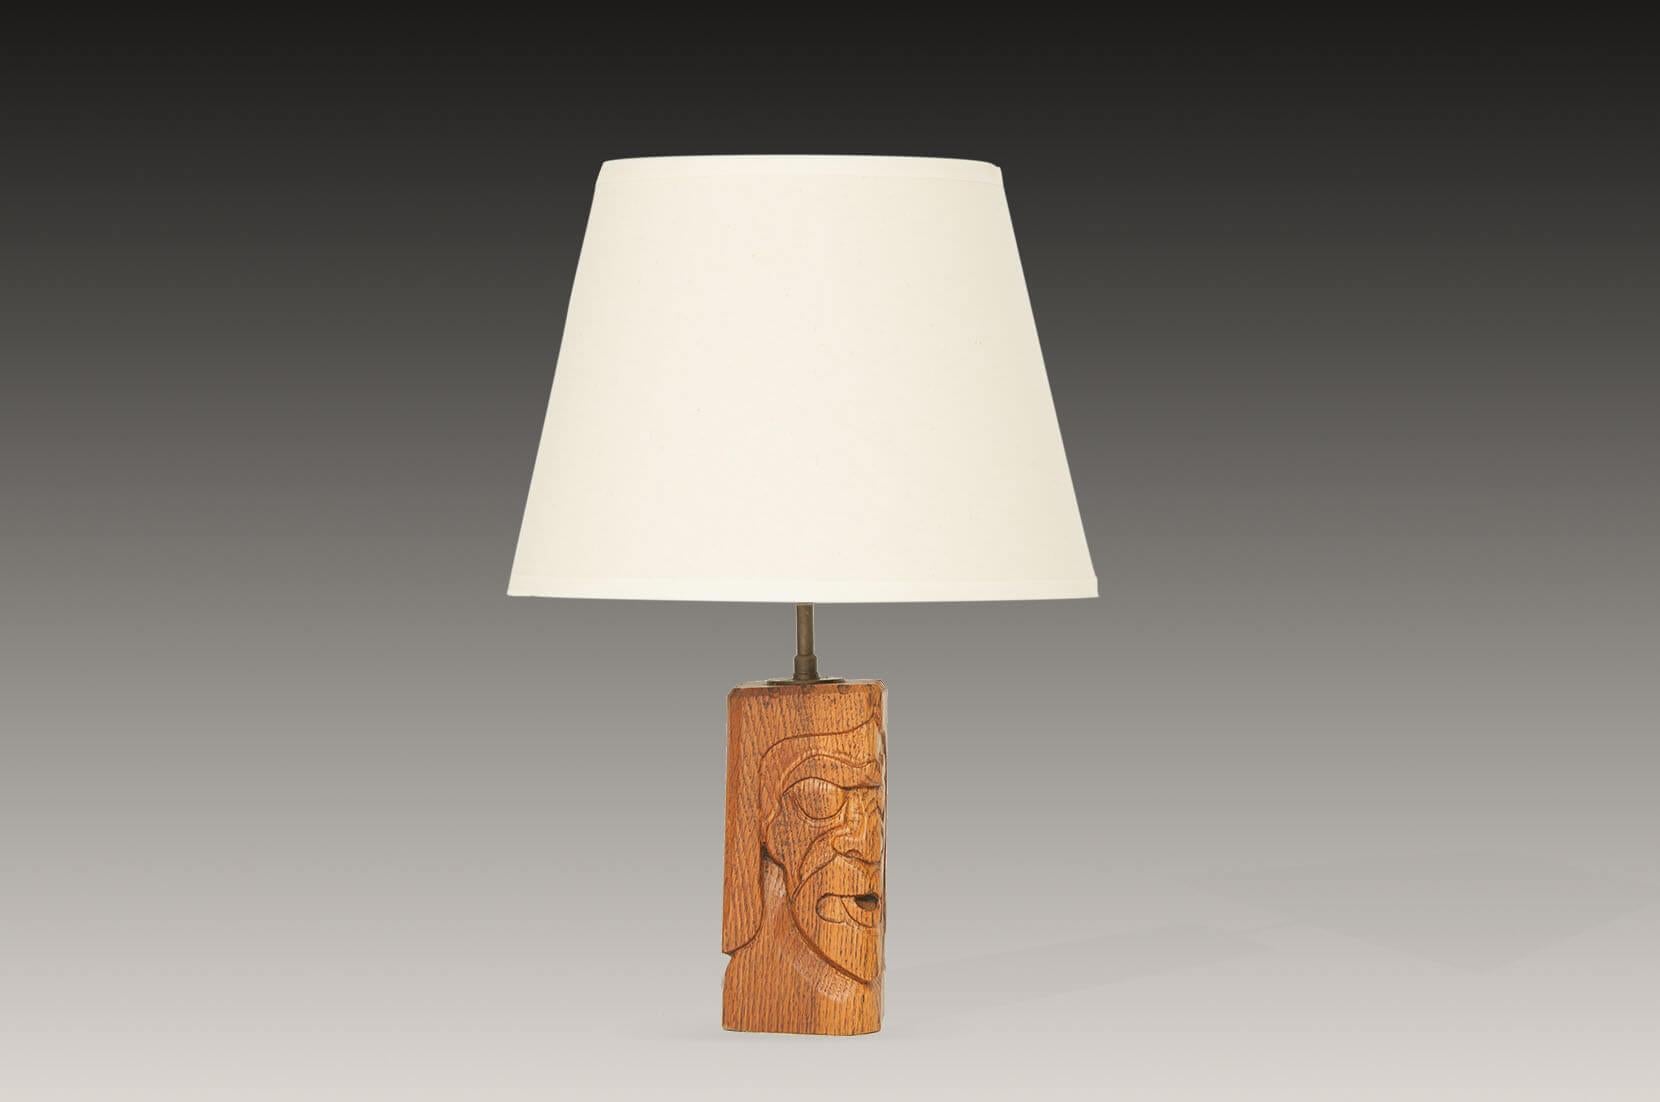 Oak Table Lamp Carved in Wood, with White Shade and Brass Tube, Signed, France 1950